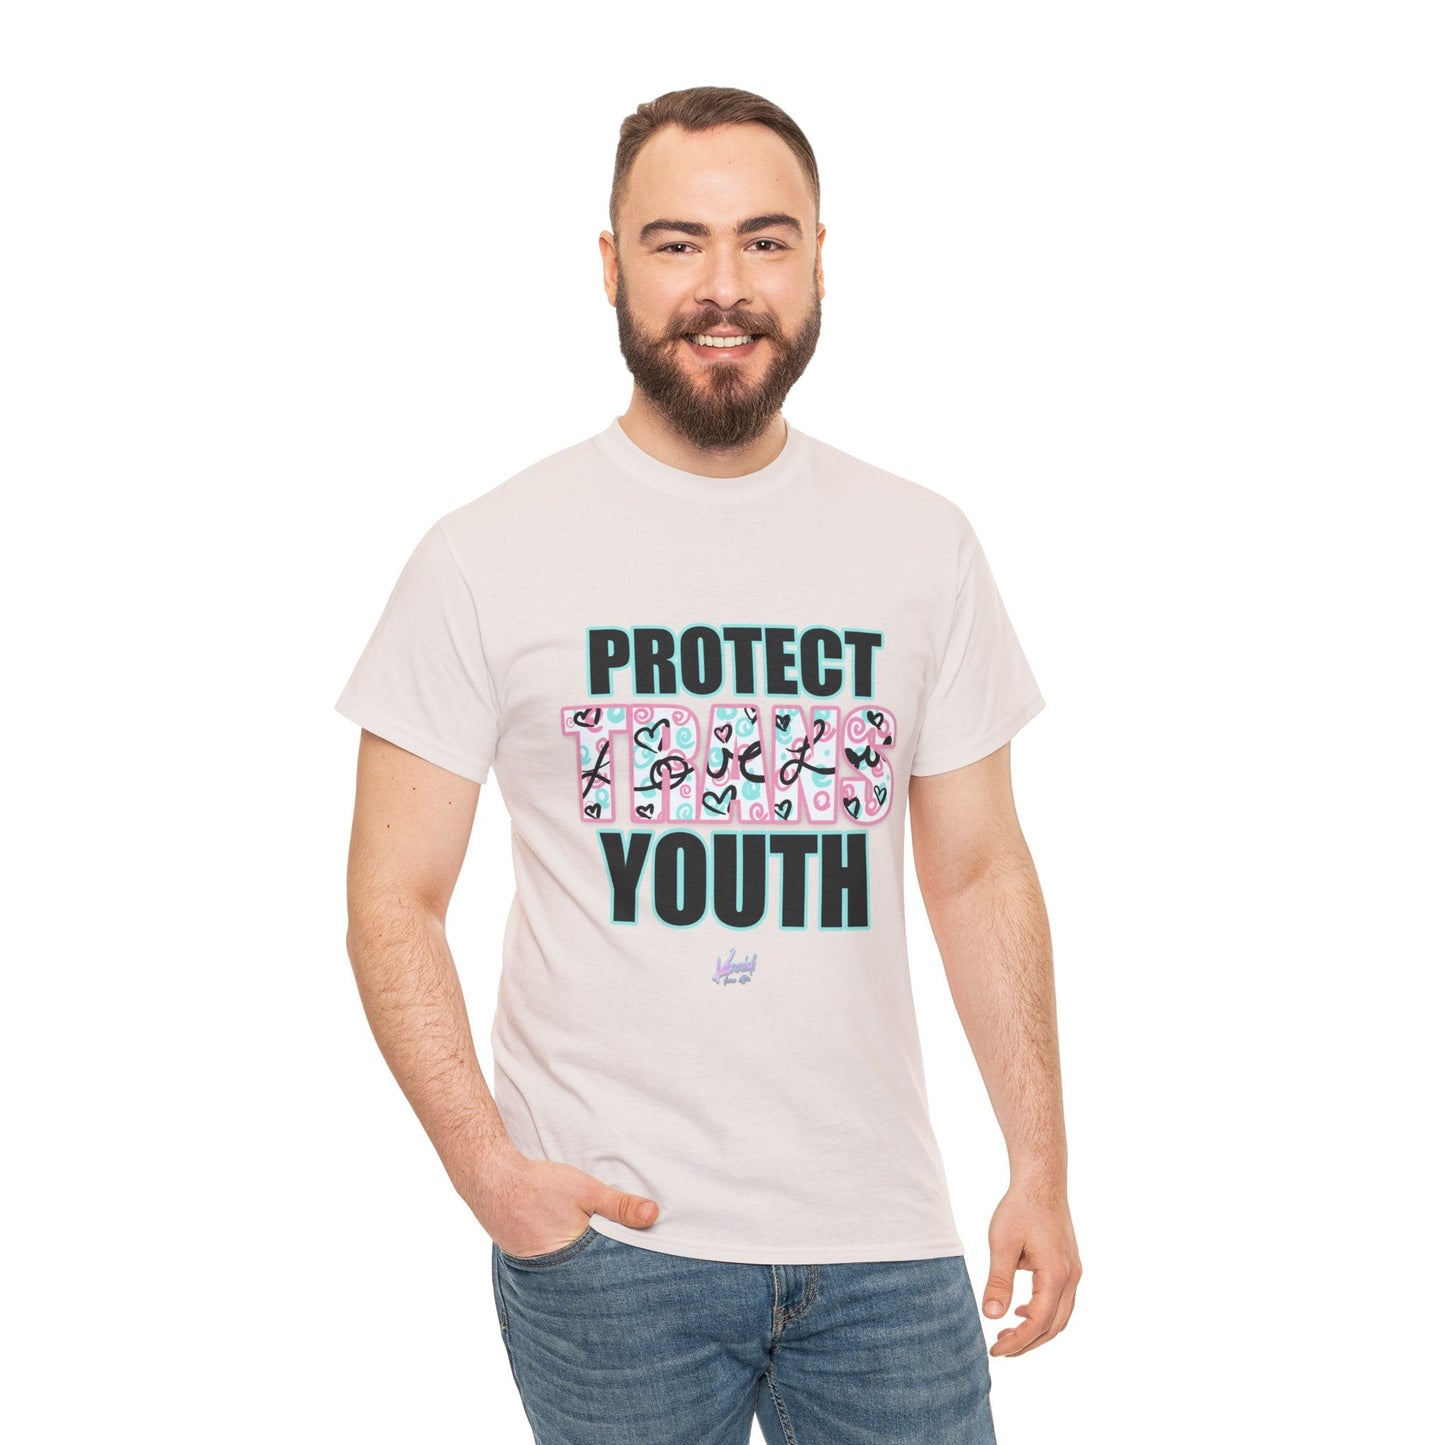 Protect Trans Youth Love 3.0 Unisex Heavy Cotton Tee - Ice Grey / S T - Shirt